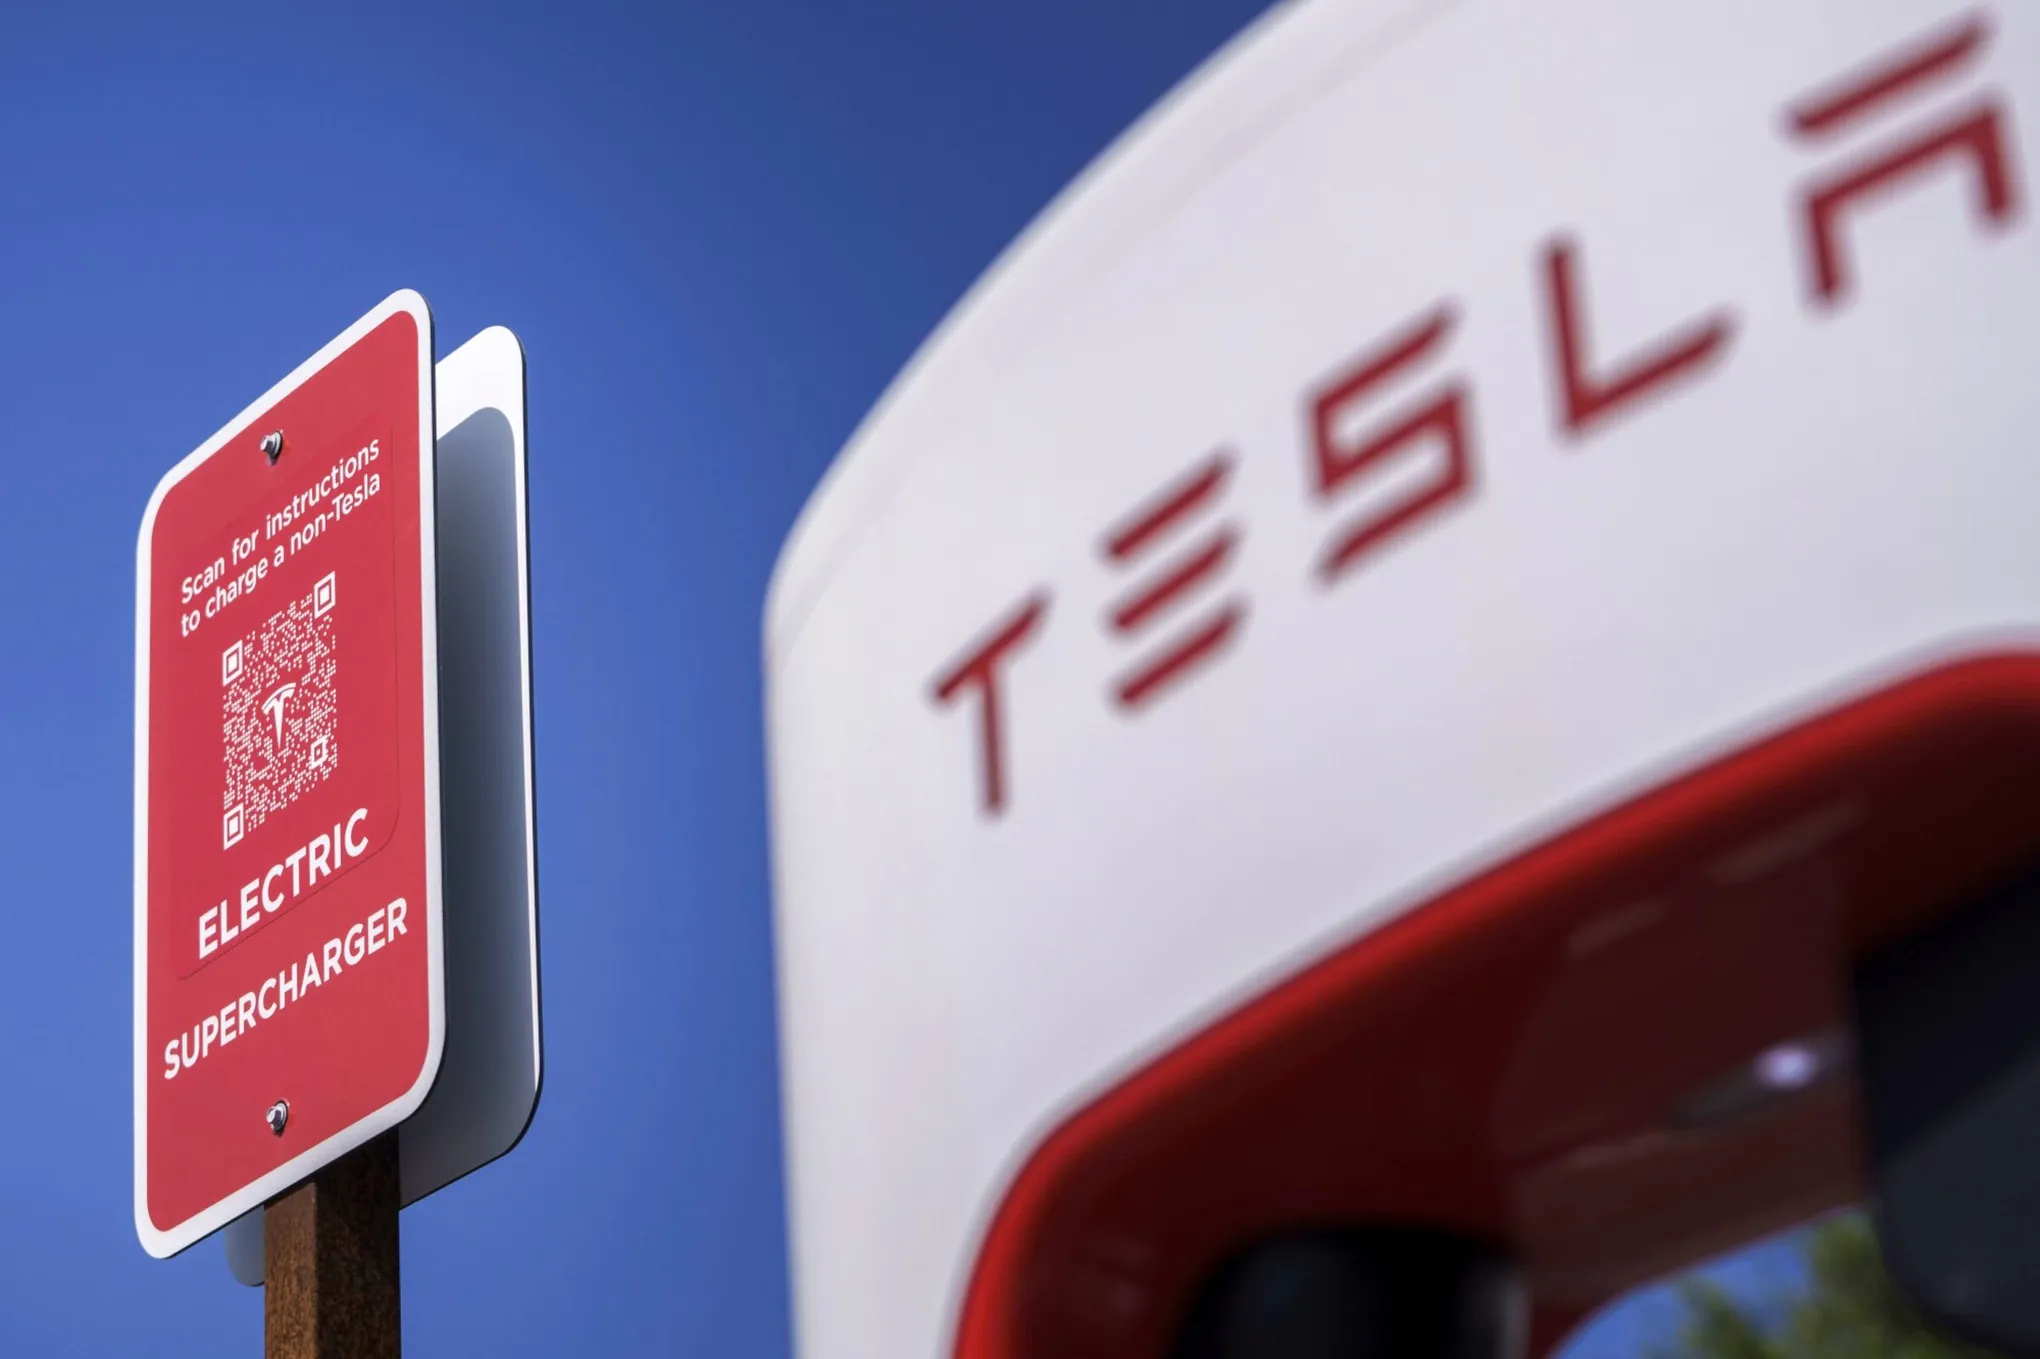 Tesla's layoffs trigger industry-wide speculation about future Supercharger operations (Credits: Bloomberg)